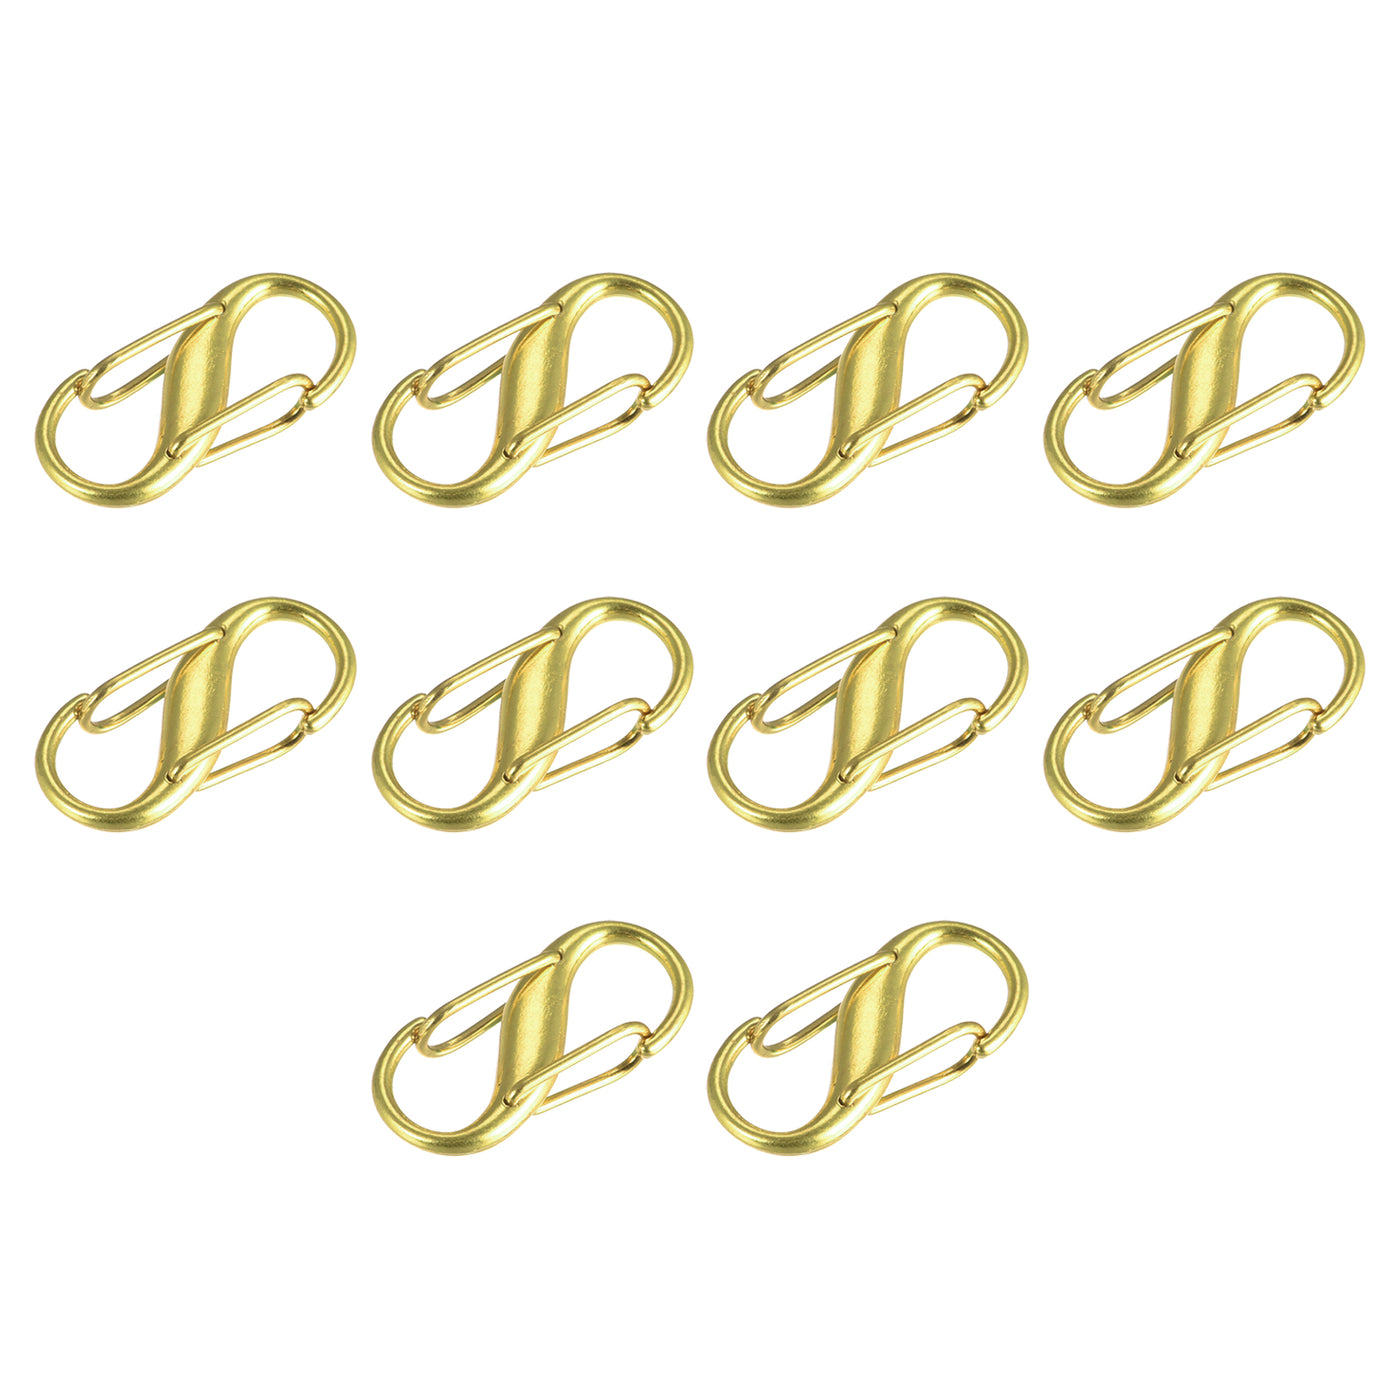 uxcell Uxcell Adjustable Metal Buckle for Chain Strap, 10Pcs 27x13mm Chain Shortener Champagne